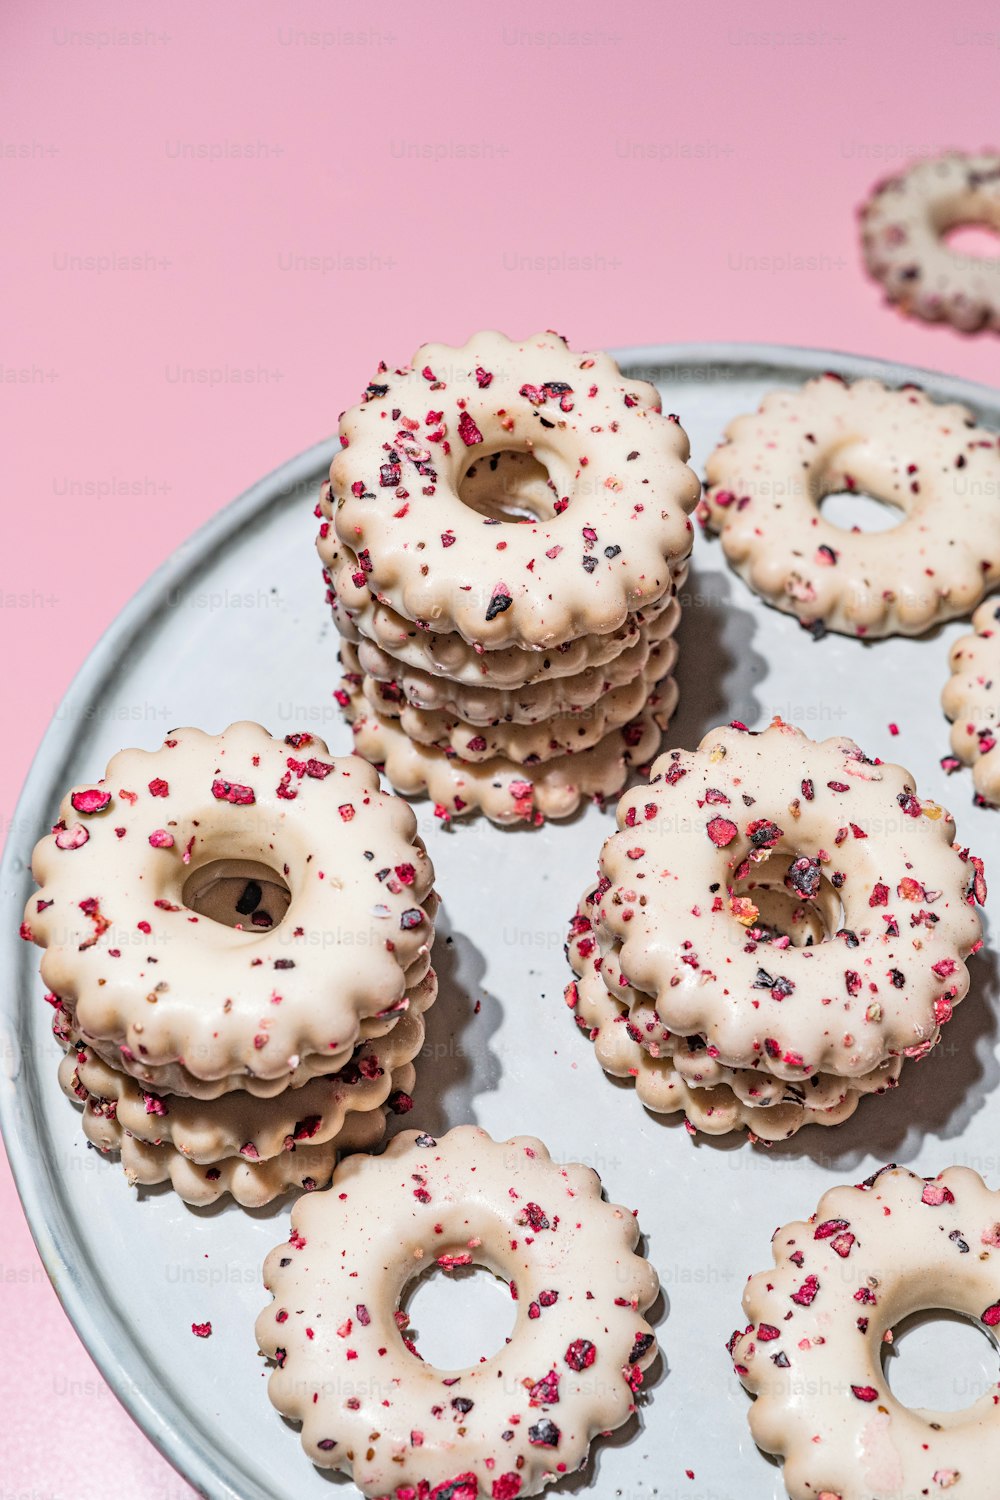 a plate of donuts with white frosting and sprinkles